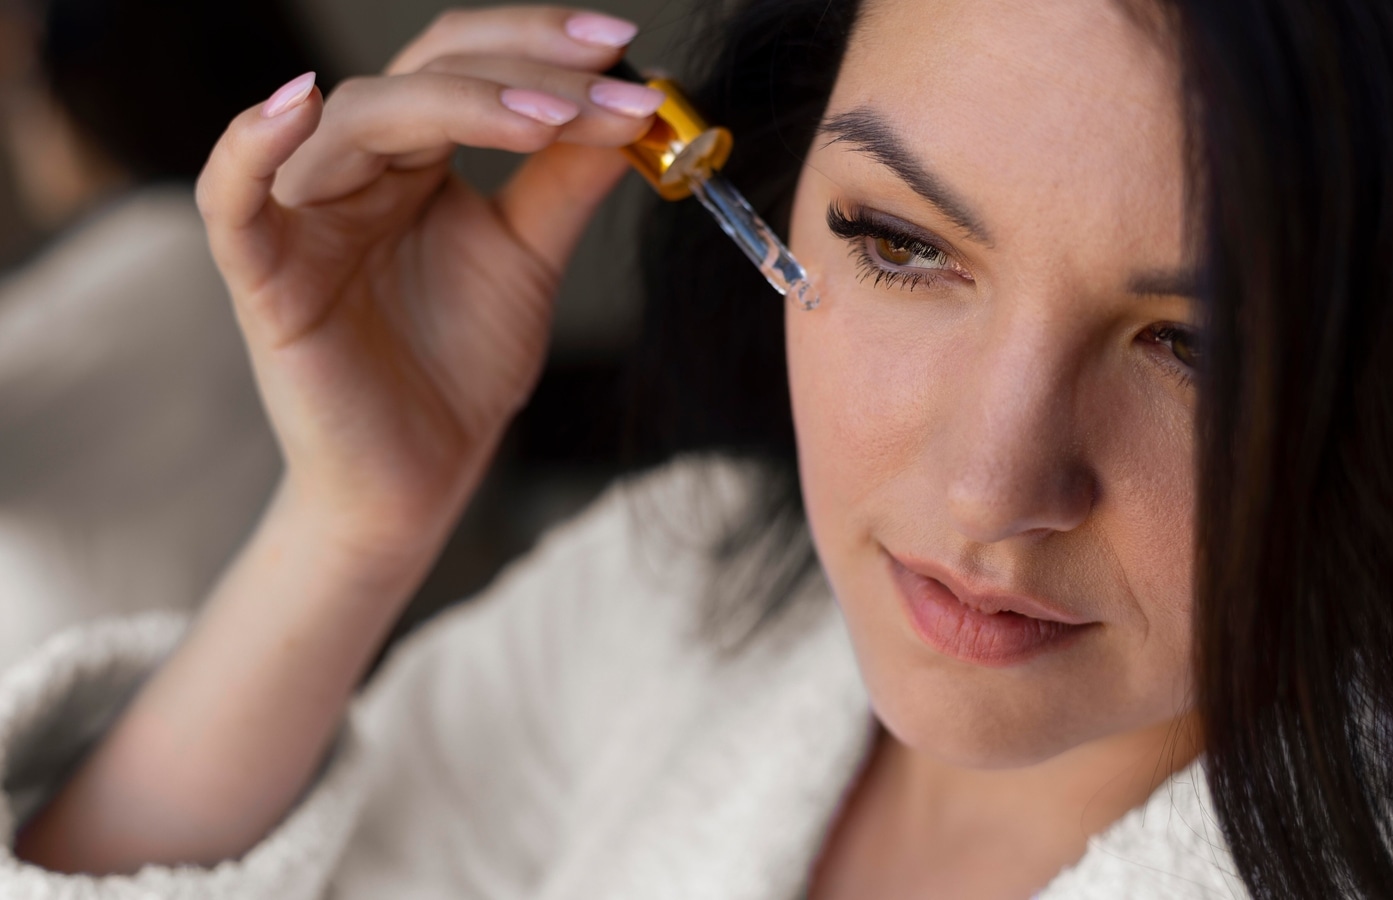 Facial oils: Tips for incorporating them into your daily skincare routine | Fashion Trends